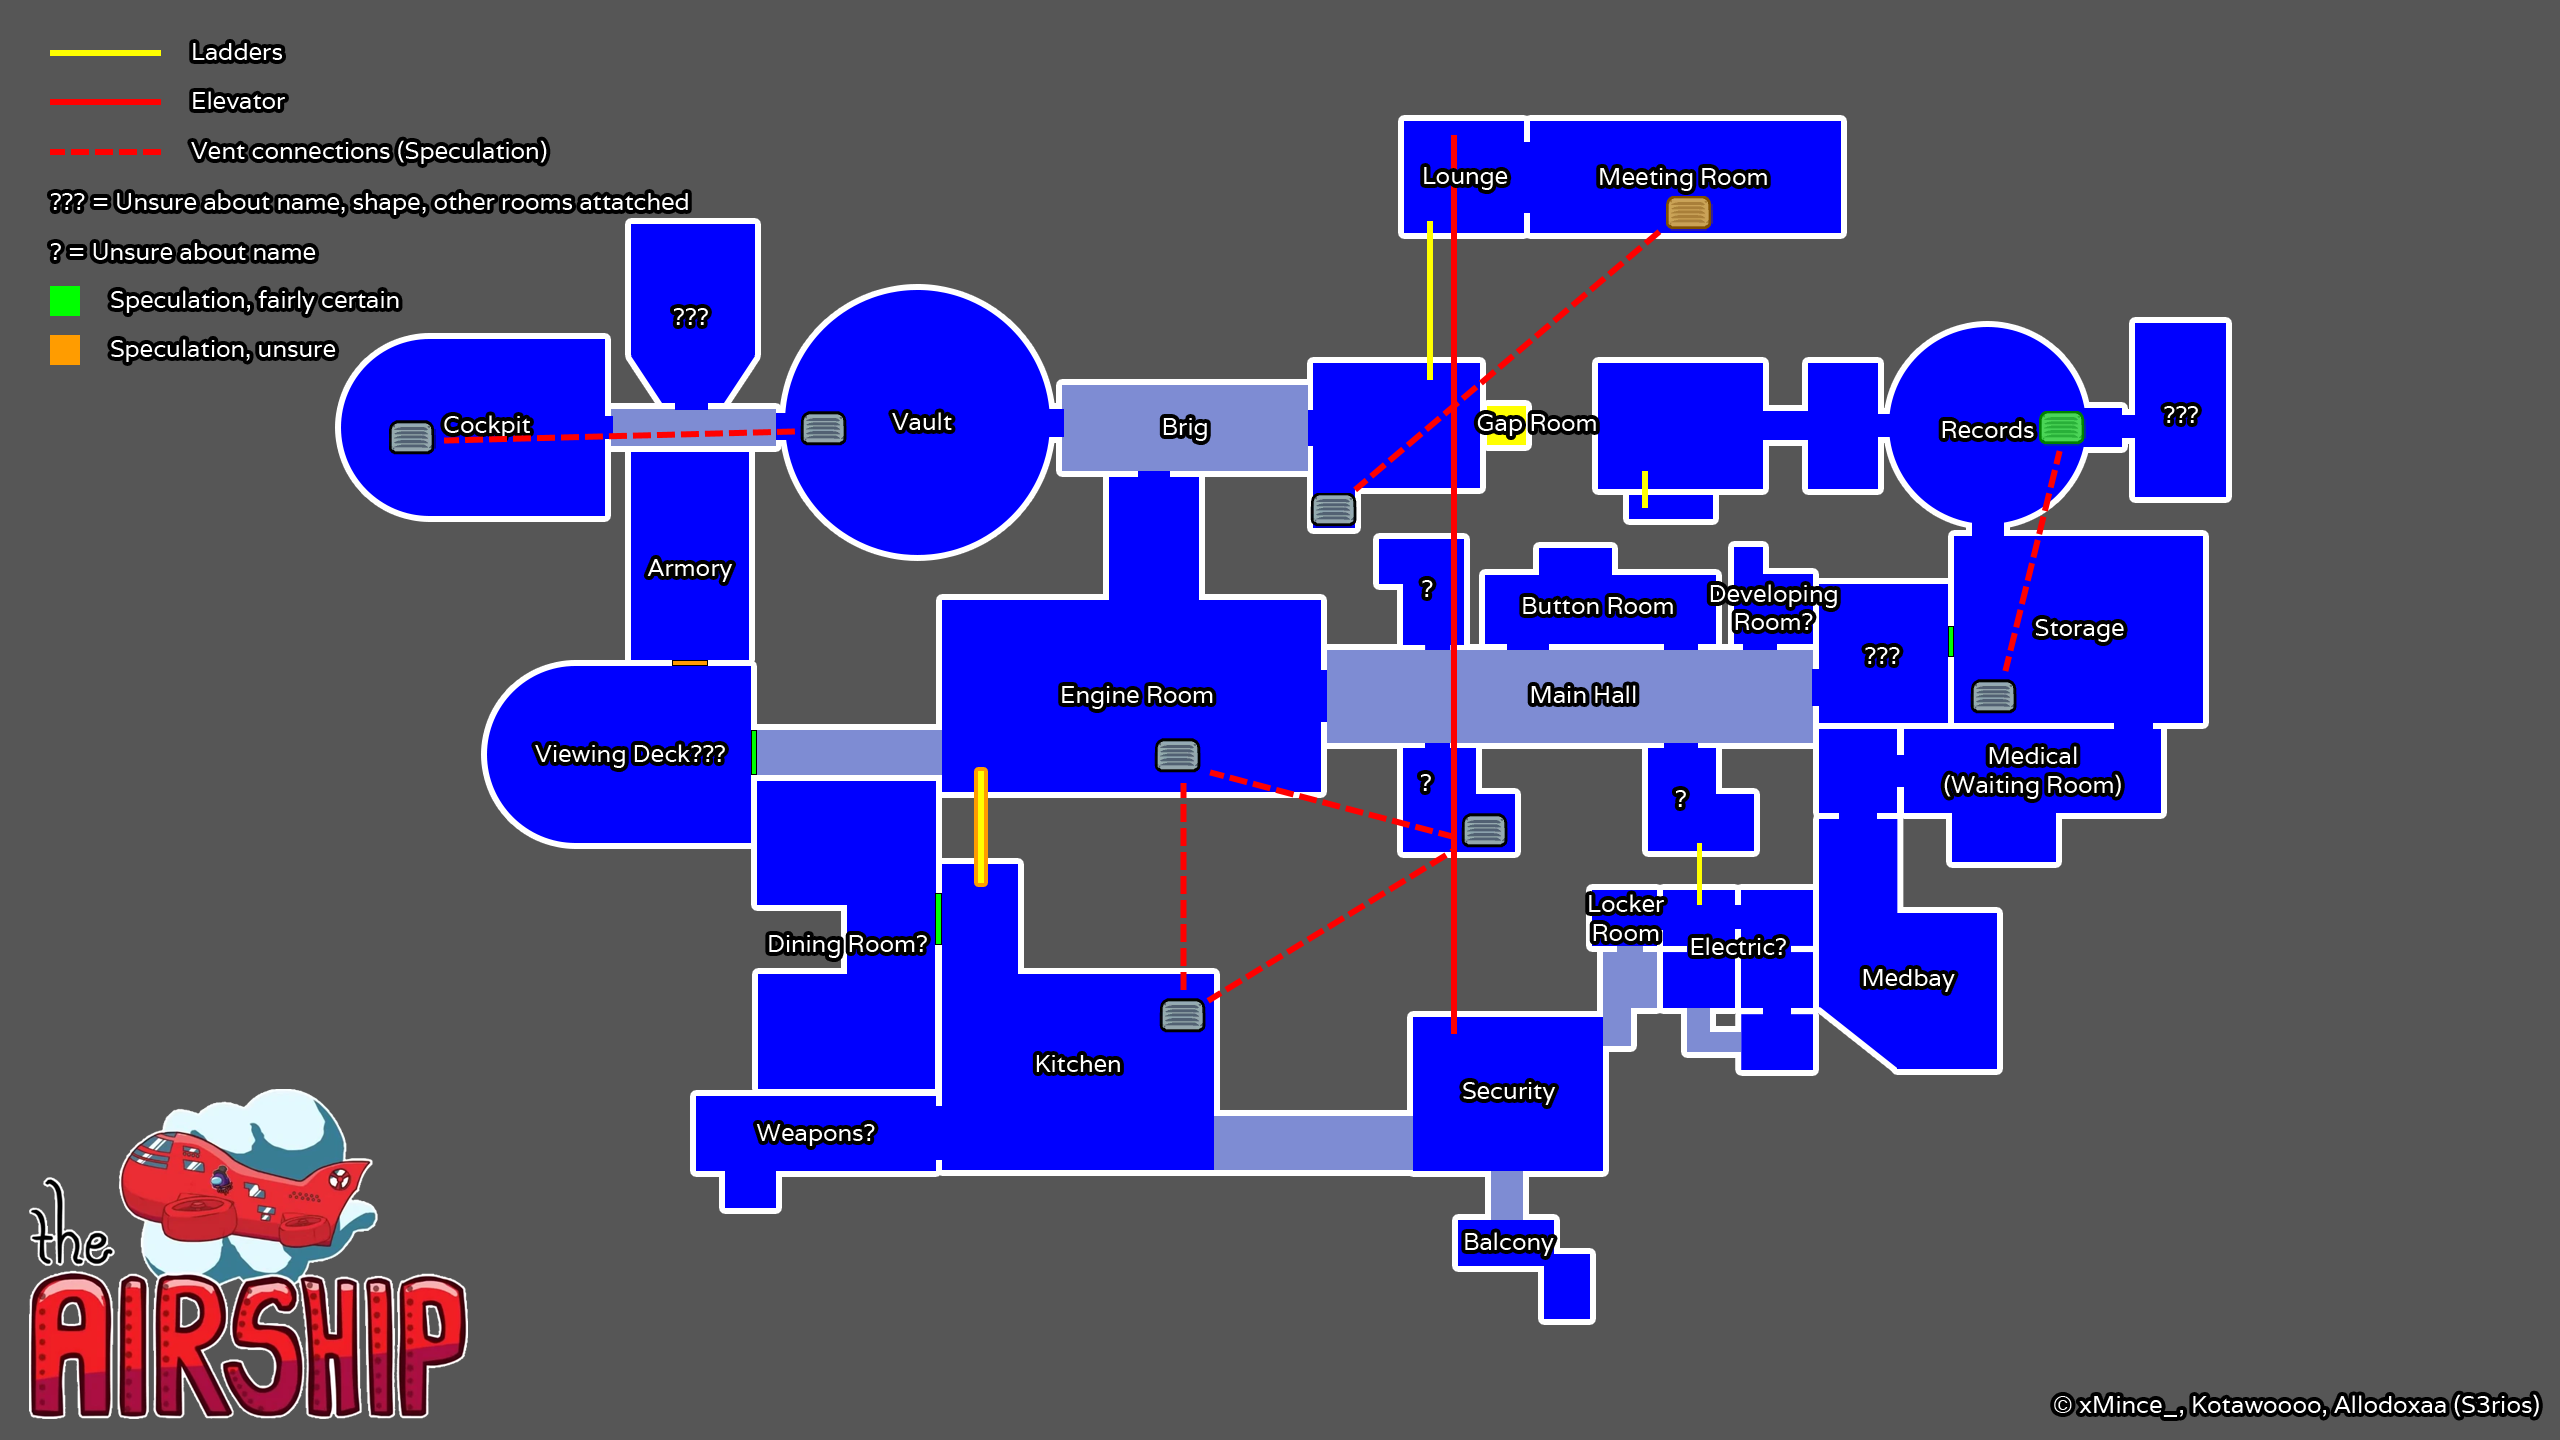 After 8 hours of scanning Among Us map trailer and Henry Stickmin collection, me and my friends have made what we believe to be an accurate, comprehensive floorplan of